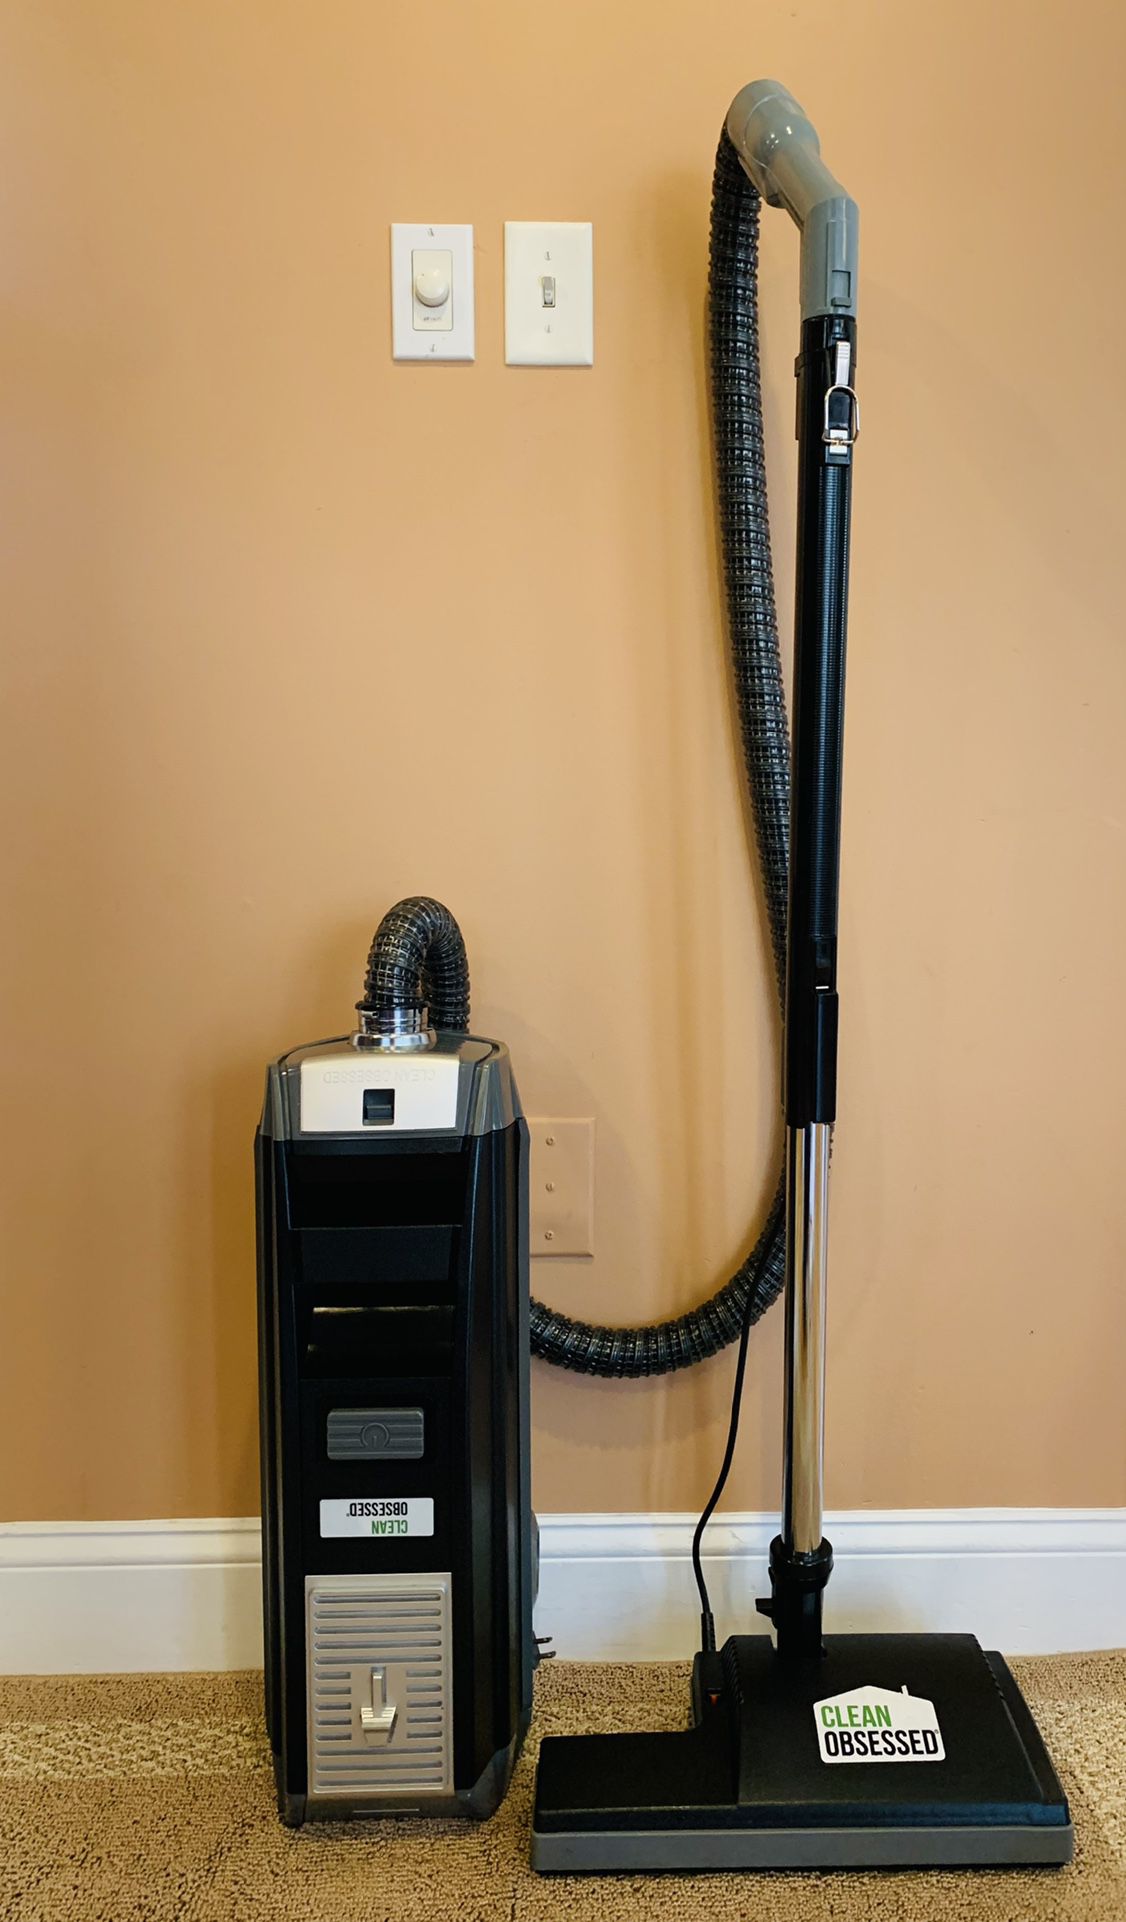 Electrolux-like clean obsessed canister vacuum cleaner